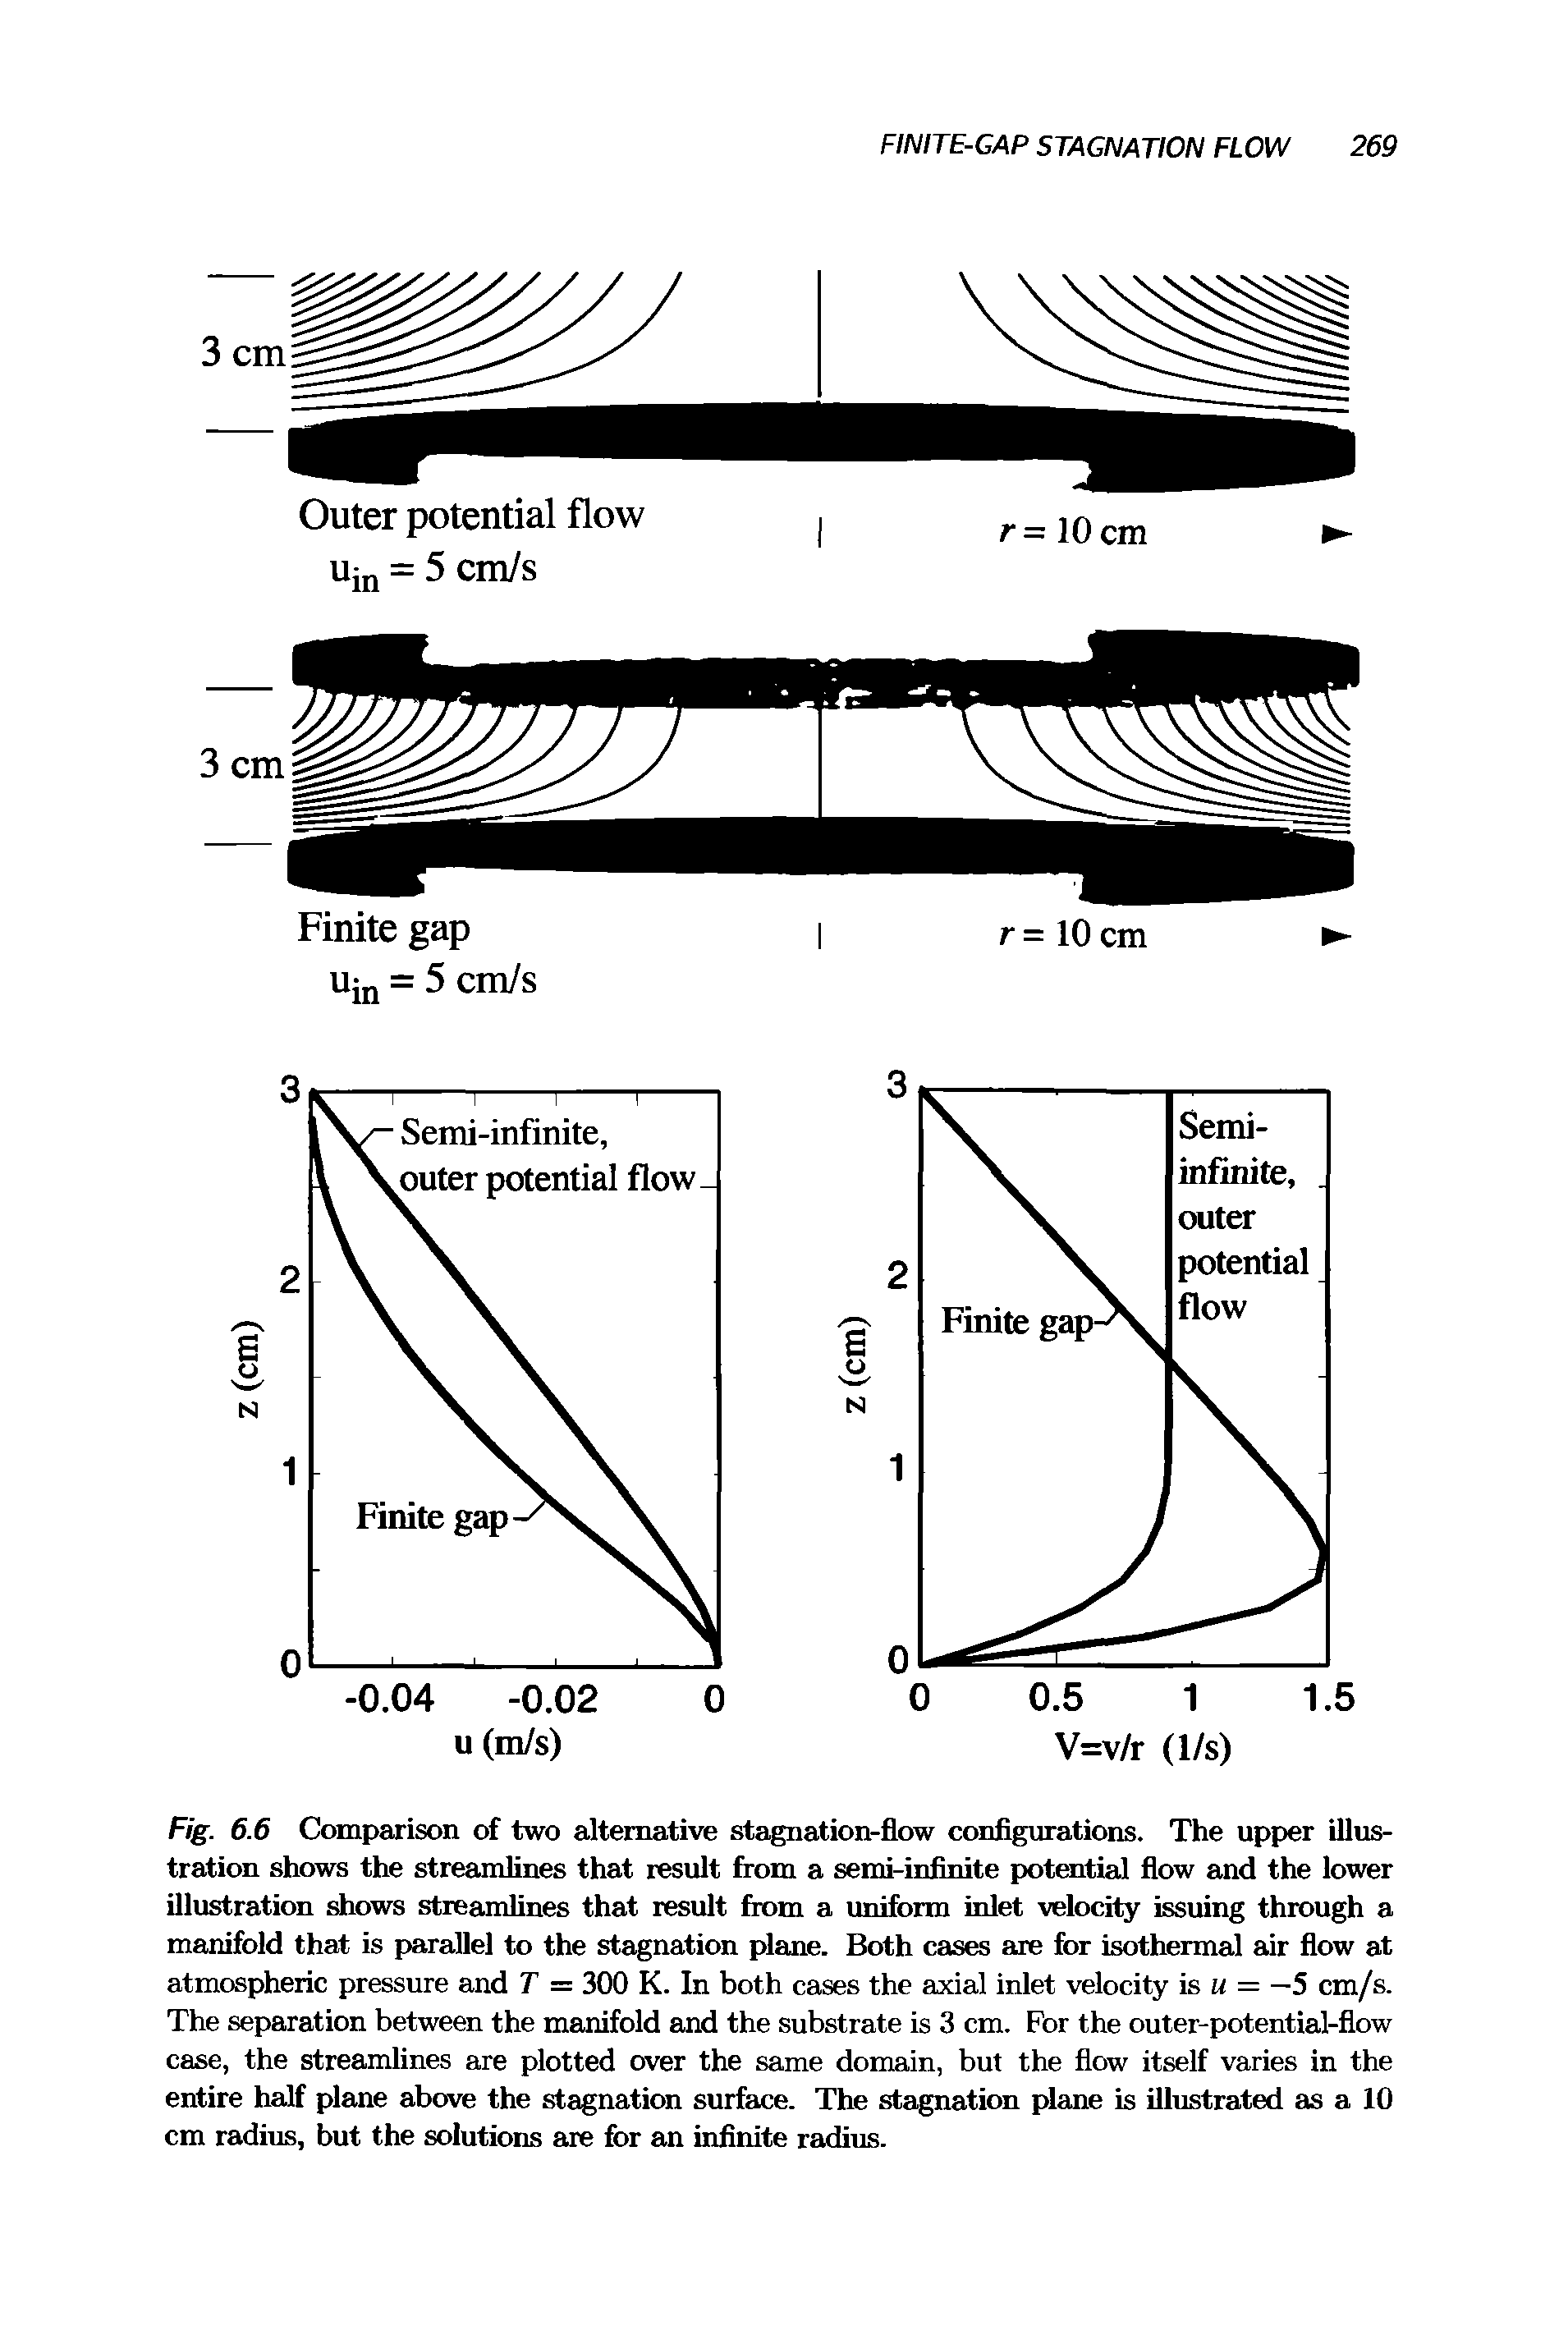 Fig. 6.6 Comparison of two alternative stagnation-flow configurations. The upper illustration shows the streamlines that result from a semi-infinite potential flow and the lower illustration shows streamlines that result from a uniform inlet velocity issuing through a manifold that is parallel to the stagnation plane. Both cases are for isothermal air flow at atmospheric pressure and T = 300 K. In both cases the axial inlet velocity is u = —5 cm/s. The separation between the manifold and the substrate is 3 cm. For the outer-potential-flow case, the streamlines are plotted over the same domain, but the flow itself varies in the entire half plane above the stagnation surface. The stagnation plane is illustrated as a 10 cm radius, but the solutions are for an infinite radius.